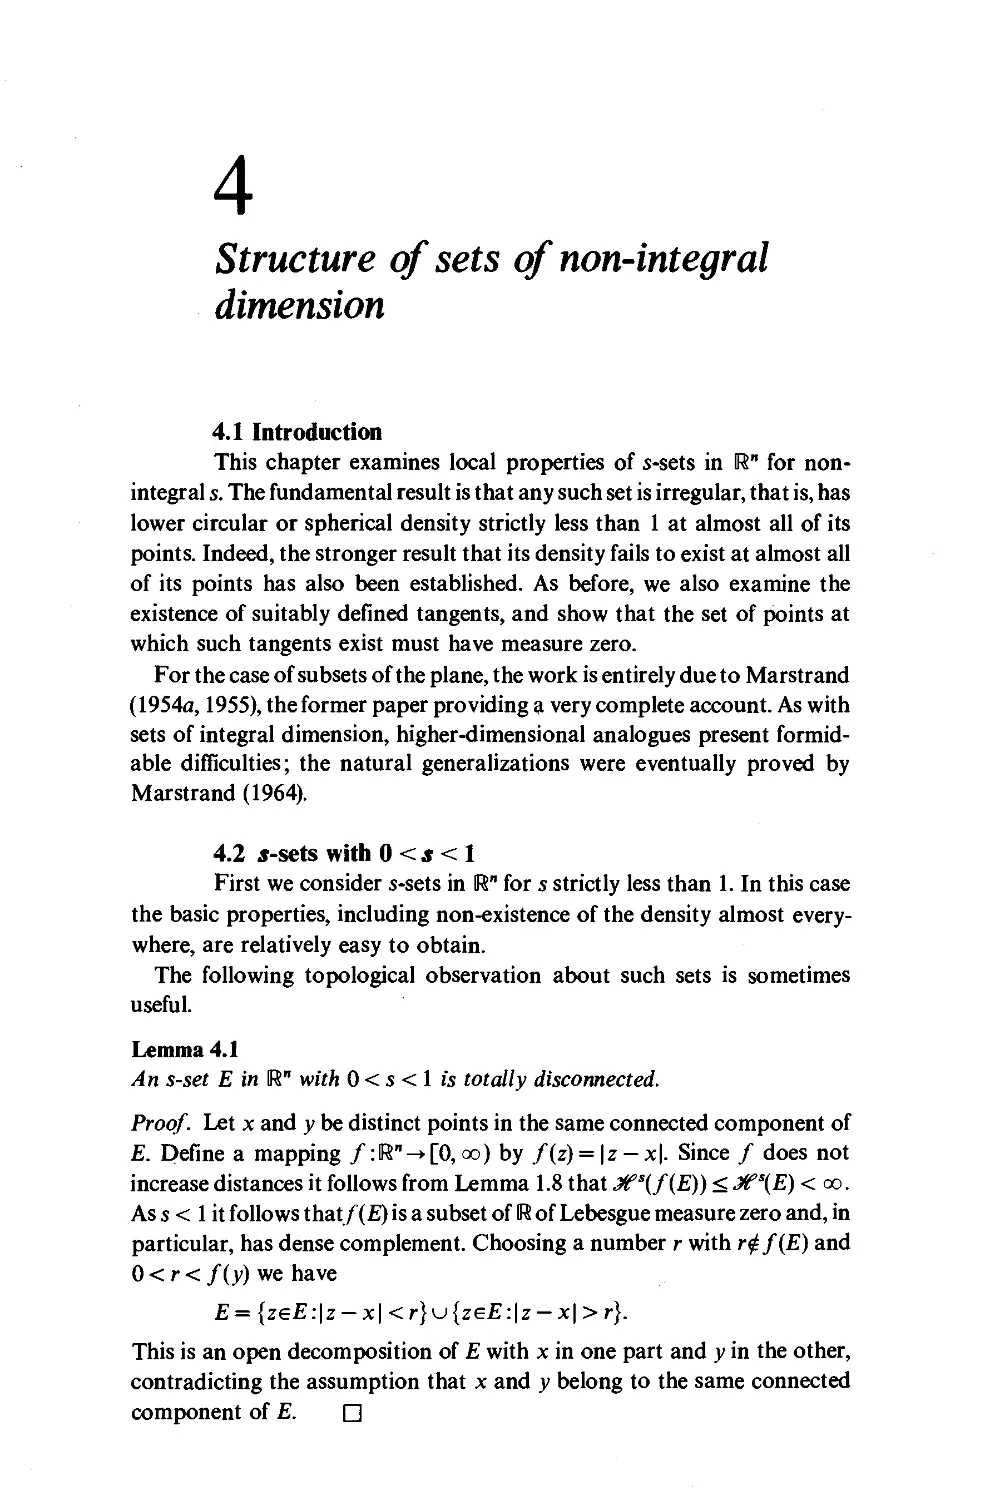 4 Structure of sets of non-integral dimension
4.2 s-sets with 0 < s < 1